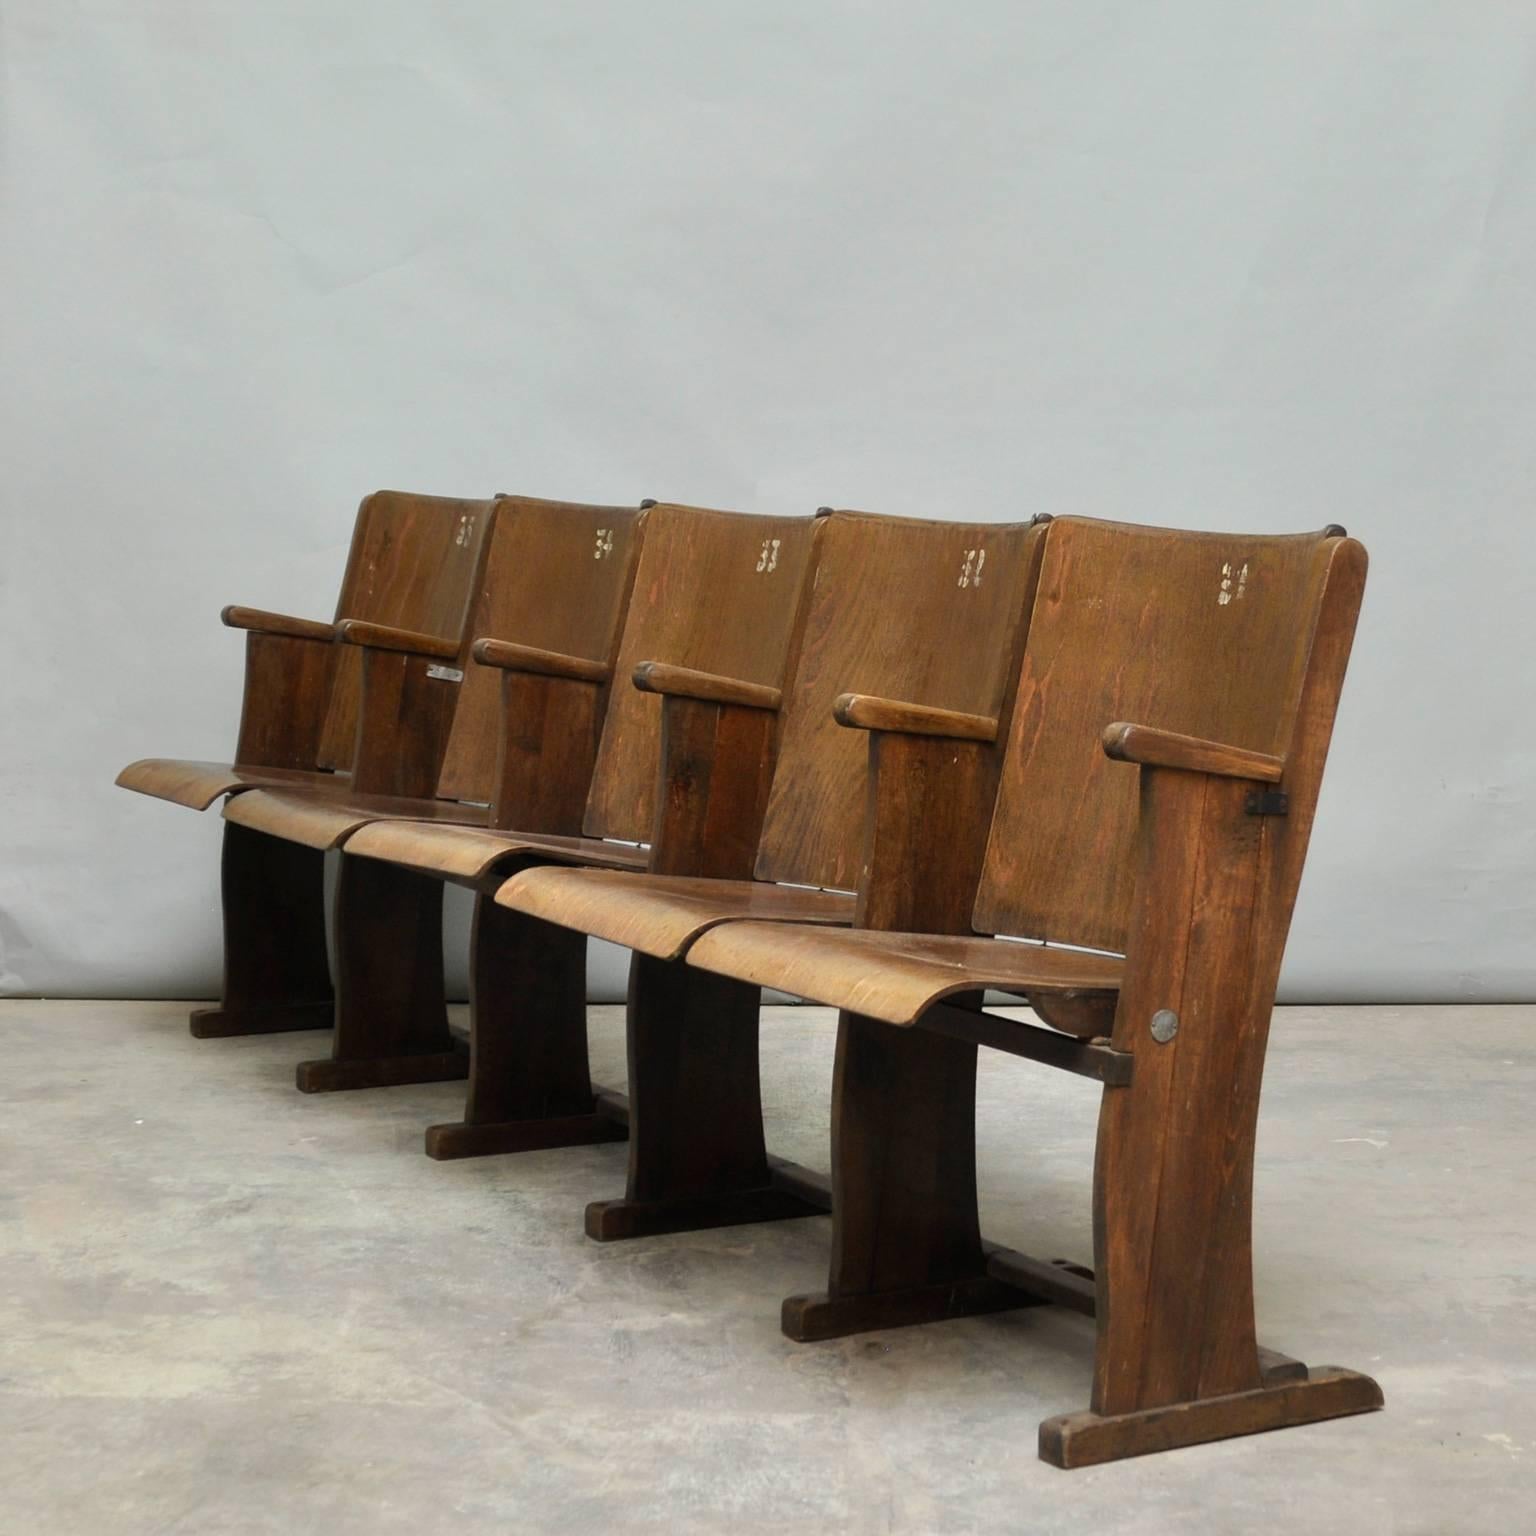 Row of five cinema seats. These chairs must be fixed to the floor. Produced by Thonet, circa 1950.